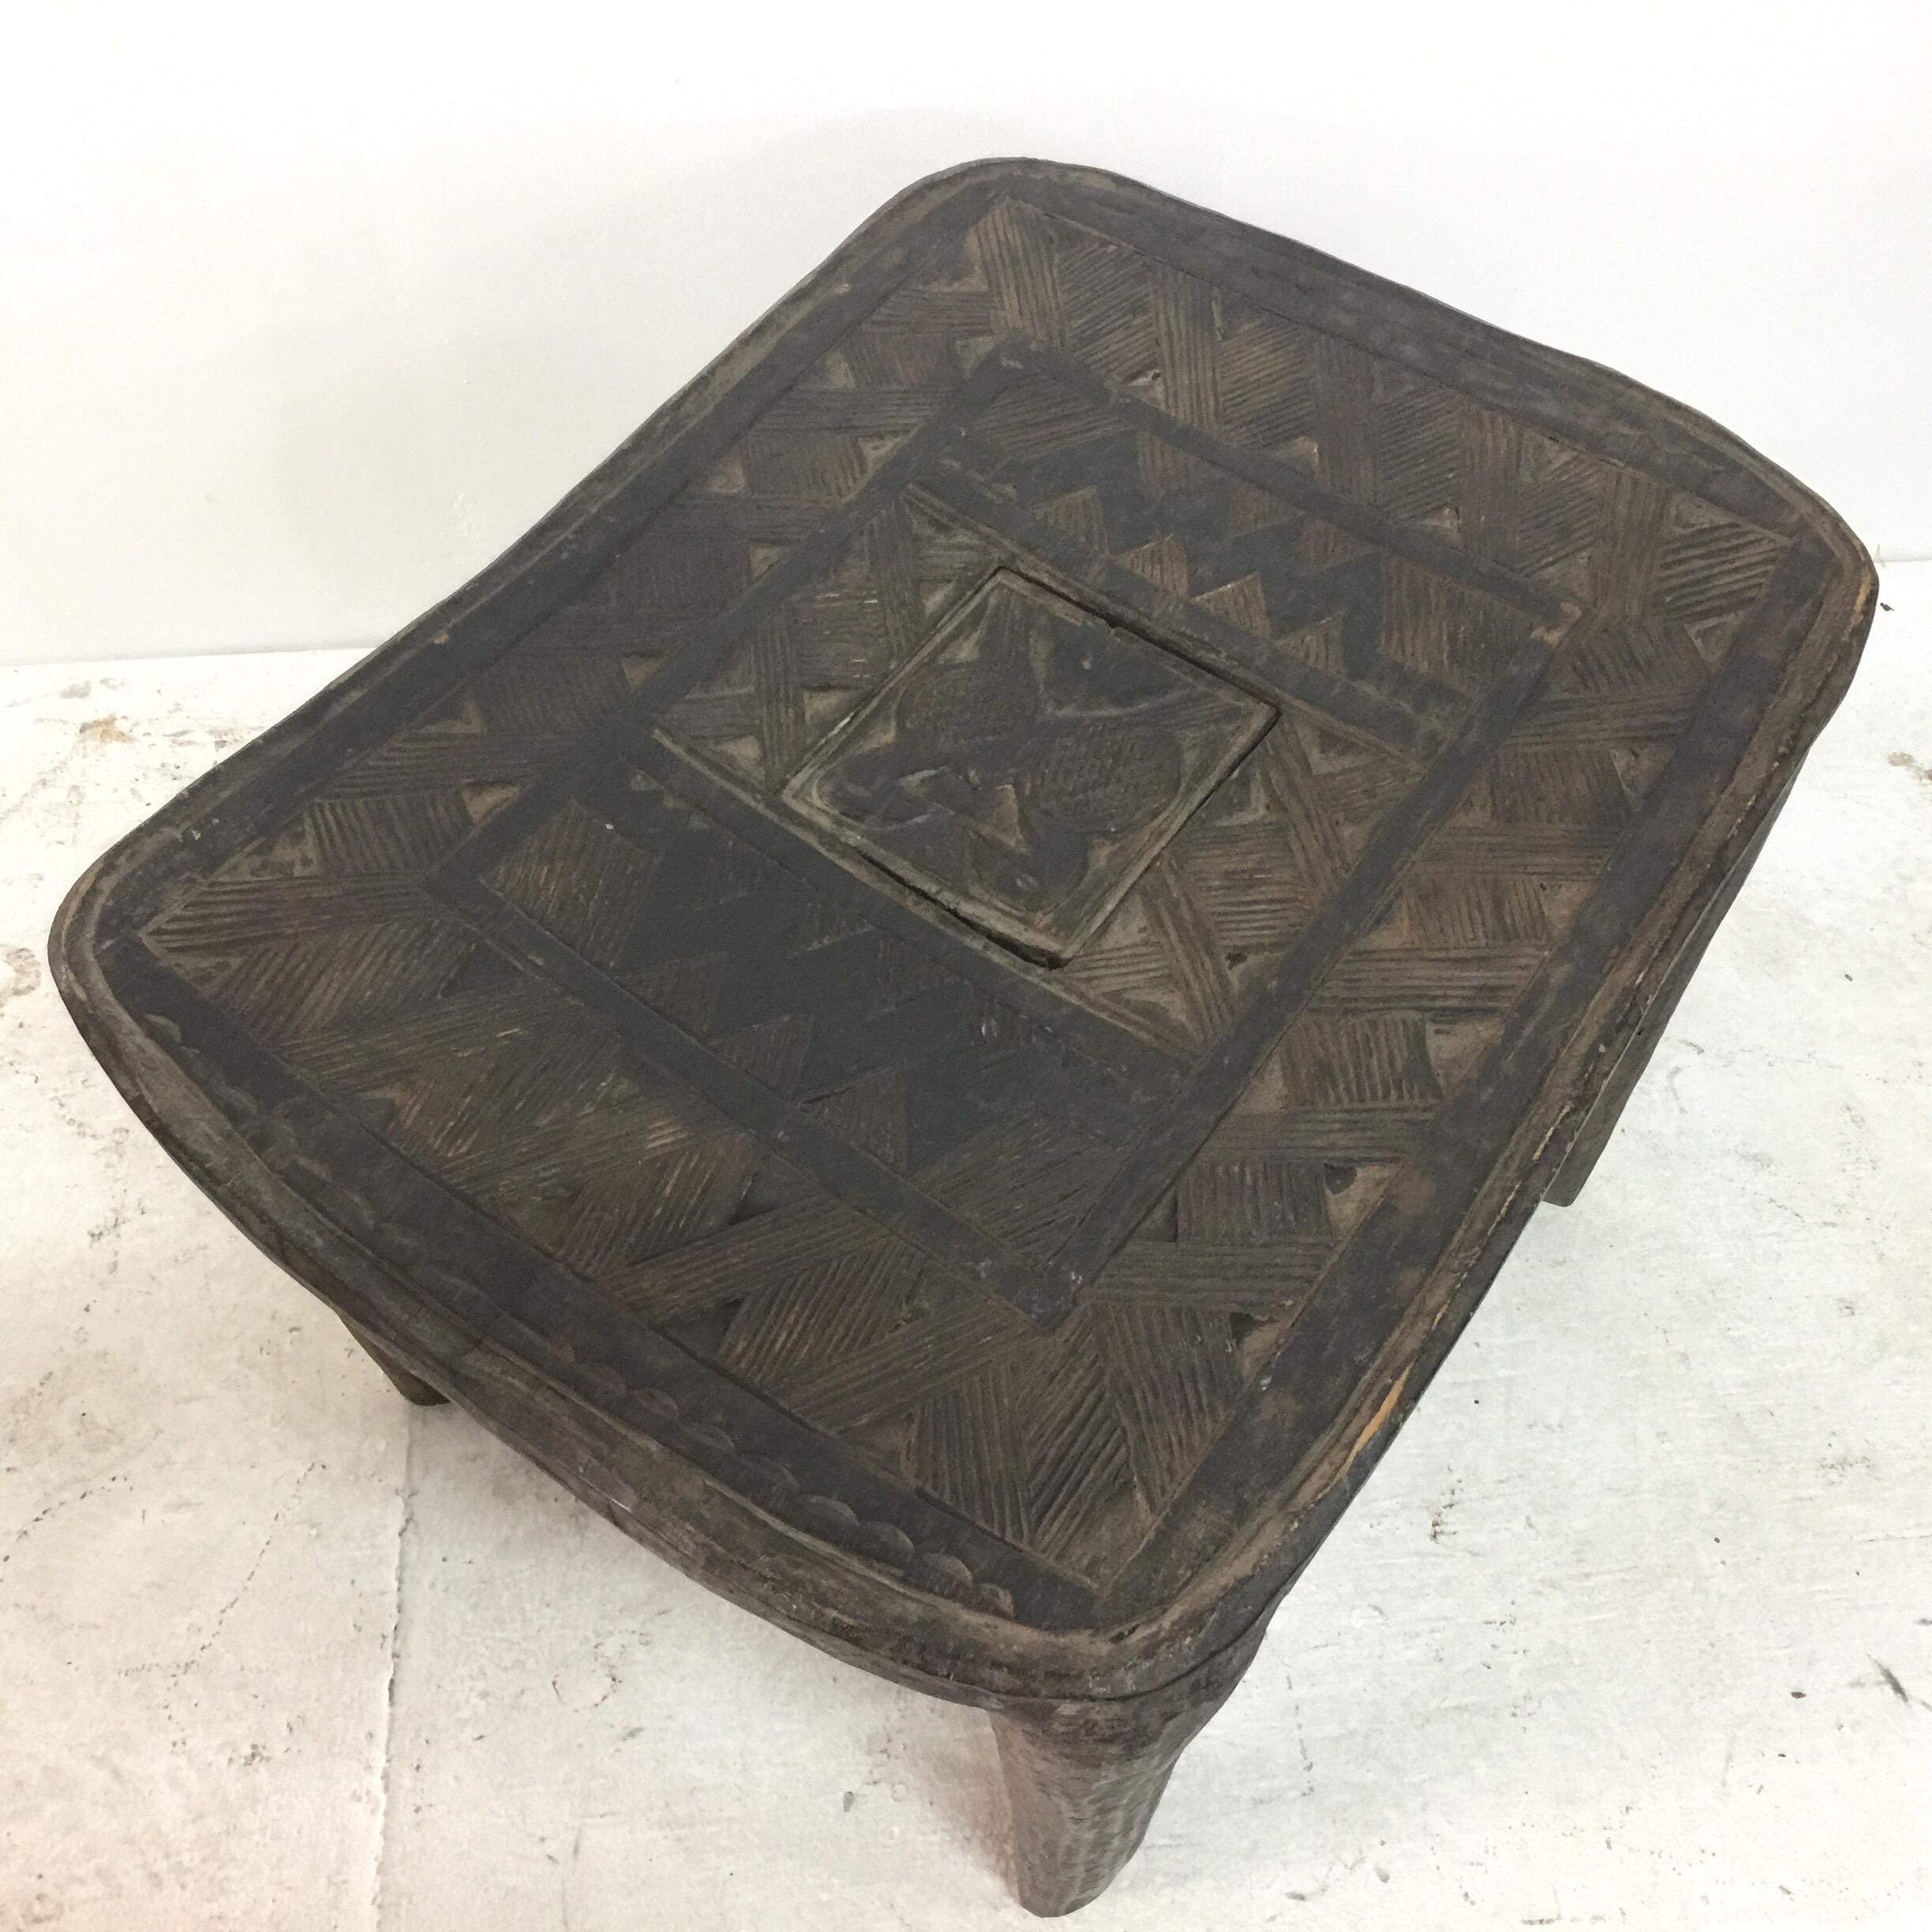 Tribal African Sidetable / Bench with Secret Compartment 3